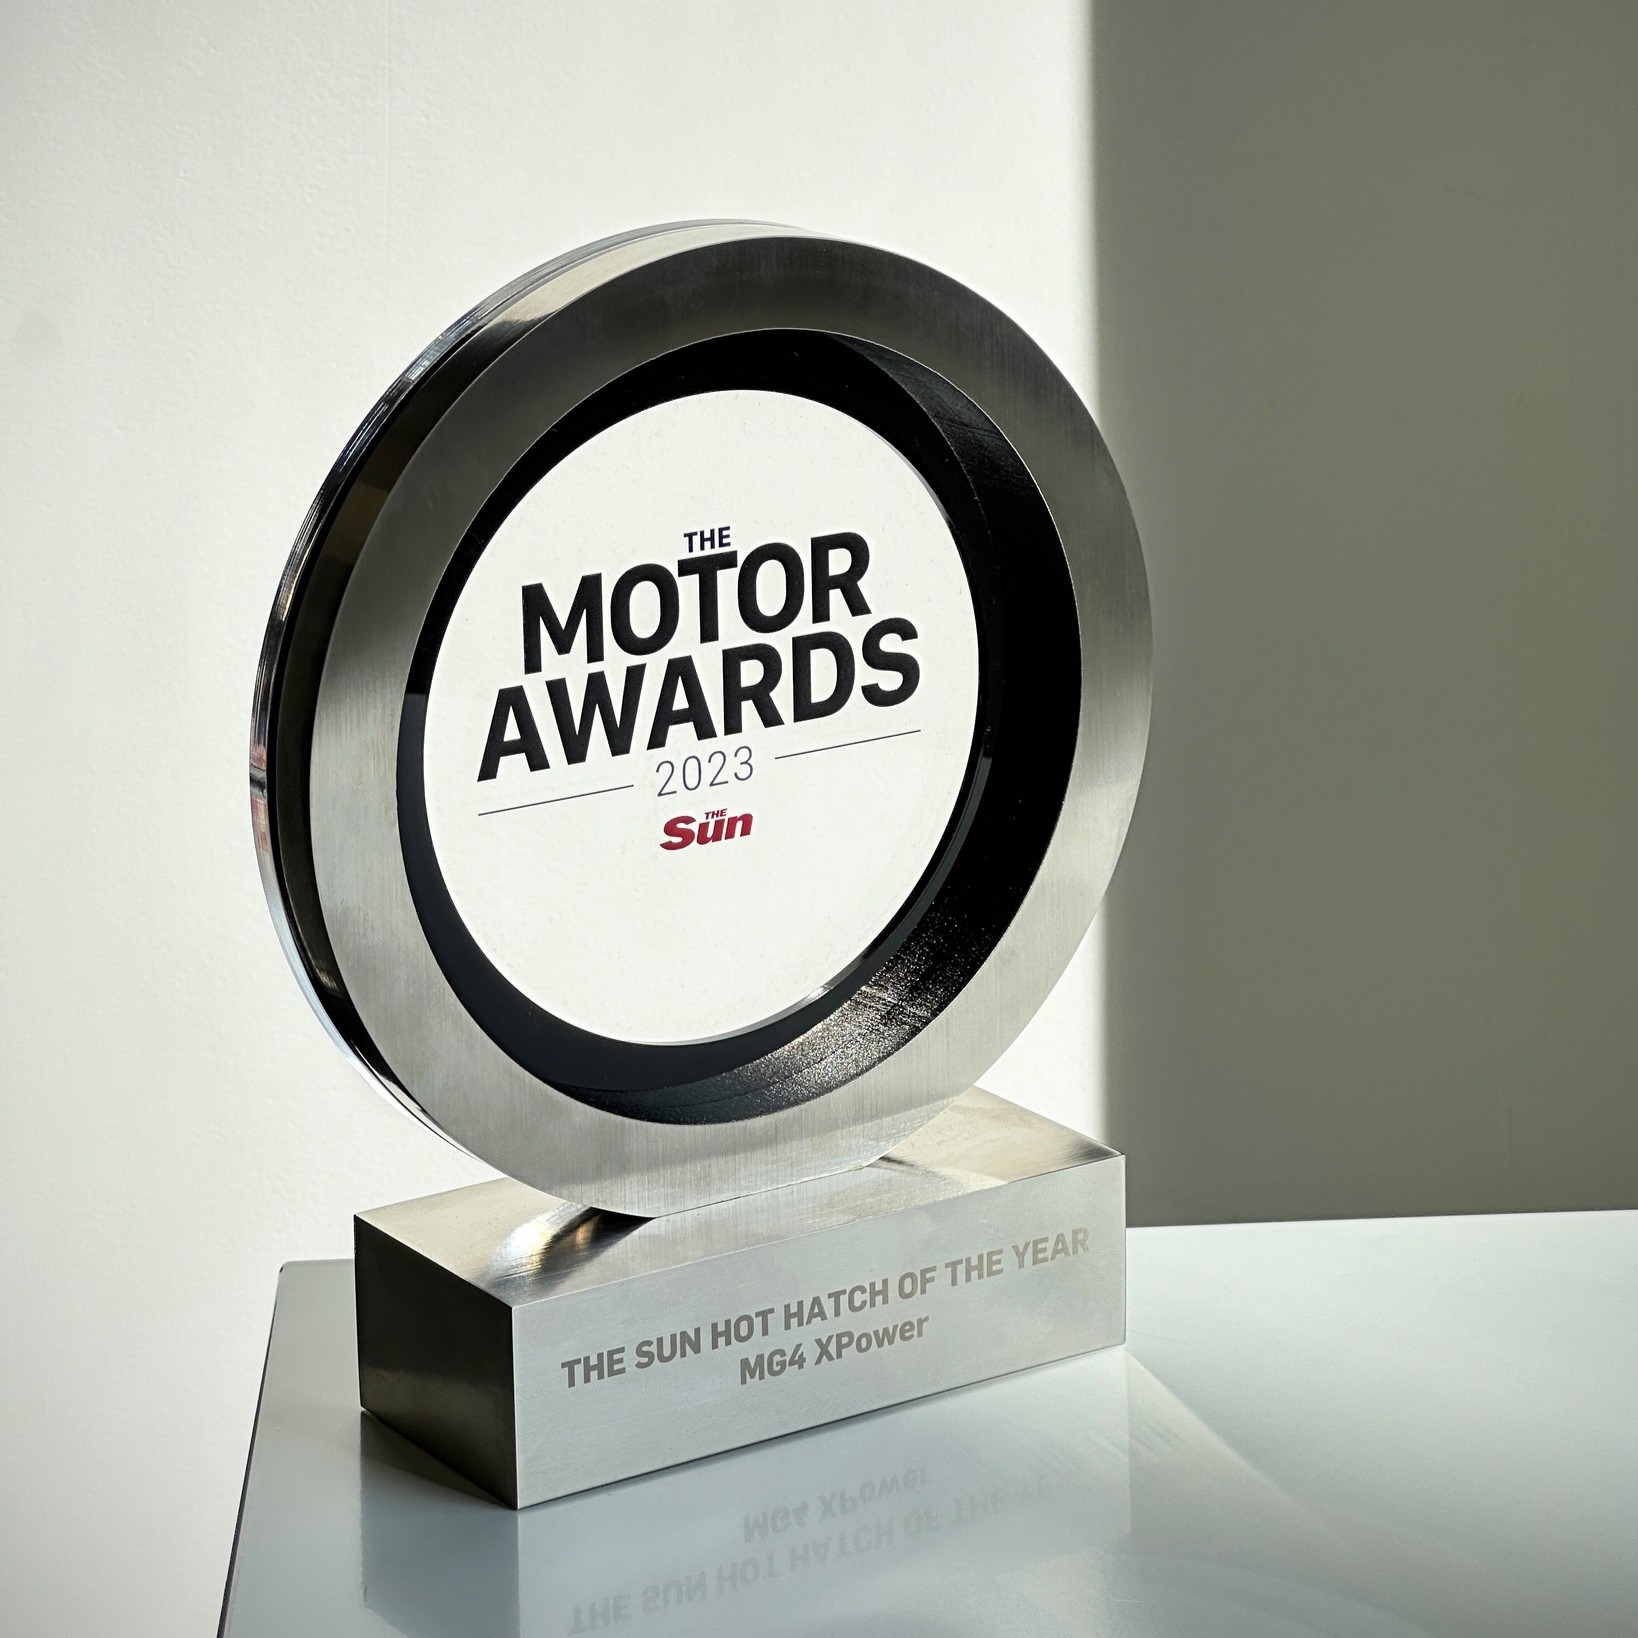 MG4 EV XPOWER receives The Sun Hot Hatch of the Year Award